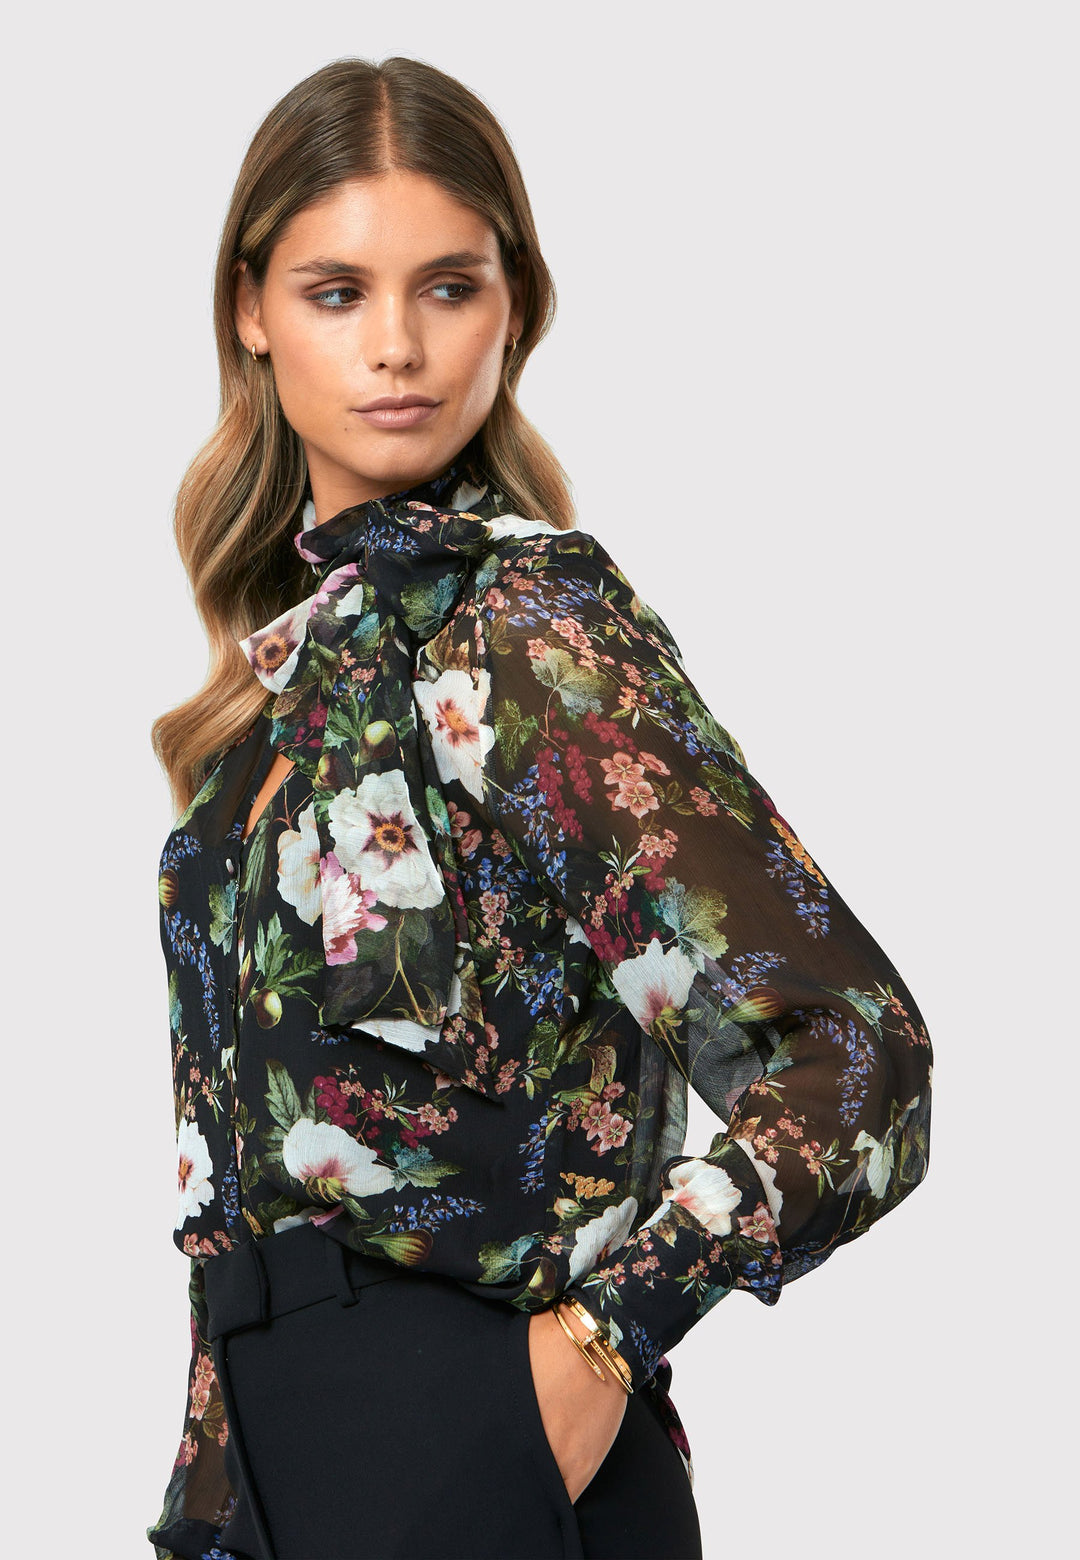 Introducing the Lorelei Floral Noir Print Blouse, a captivating blend of elegance and versatility. This blouse showcases a beautiful black-based floral print, adding a touch of sophistication to any outfit. The pussy bow neck tie, atop a flattering v-neckline, offers a versatile styling option. Wear it tied for a polished and feminine look or leave it down for a more relaxed feel. The button-down front adds a classic element, while the full-length sleeves and thick button-down cuffs exude refinement. 